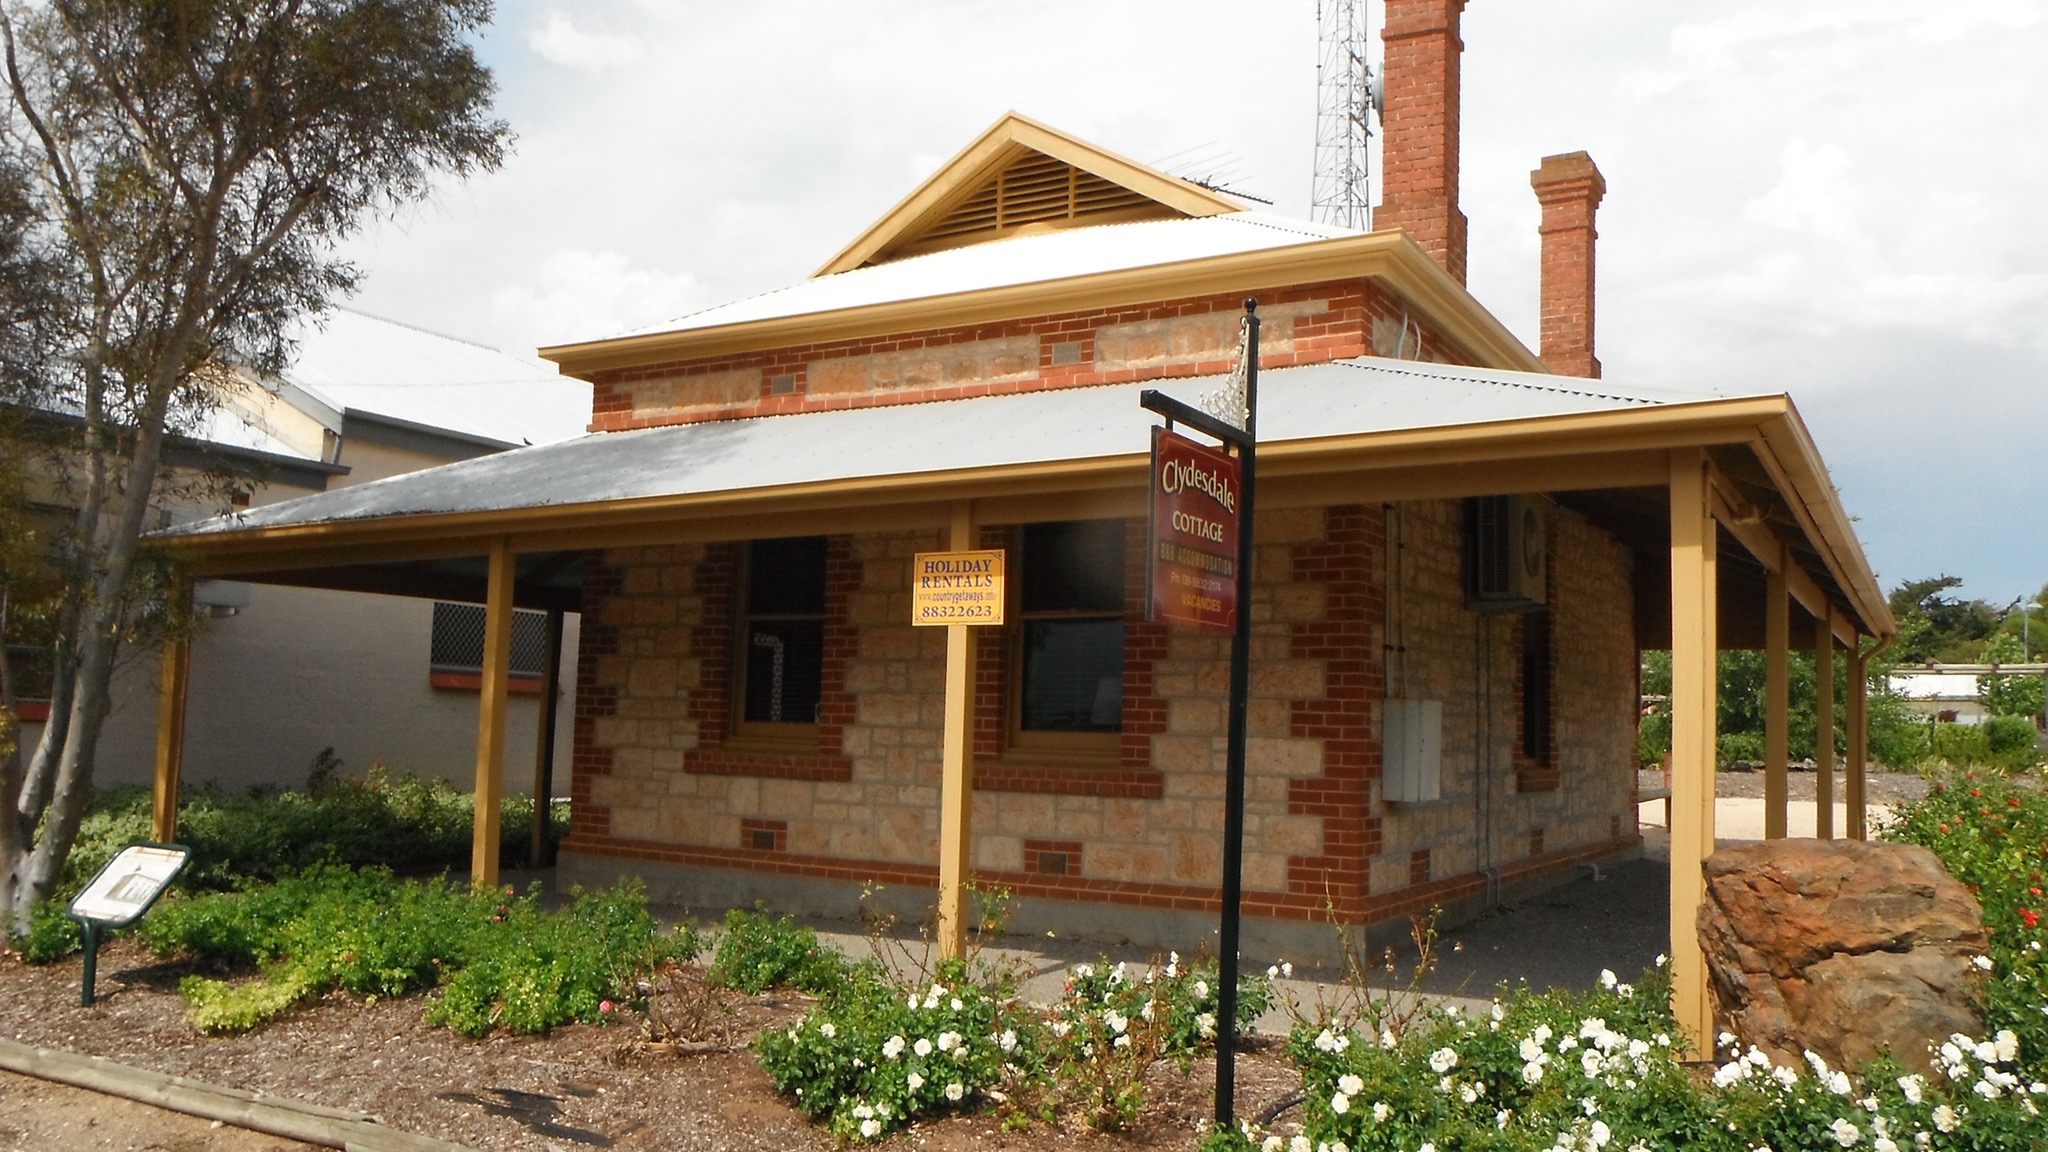 Clydesdale Cottage Bed & Breakfast - Nambucca Heads Accommodation 0